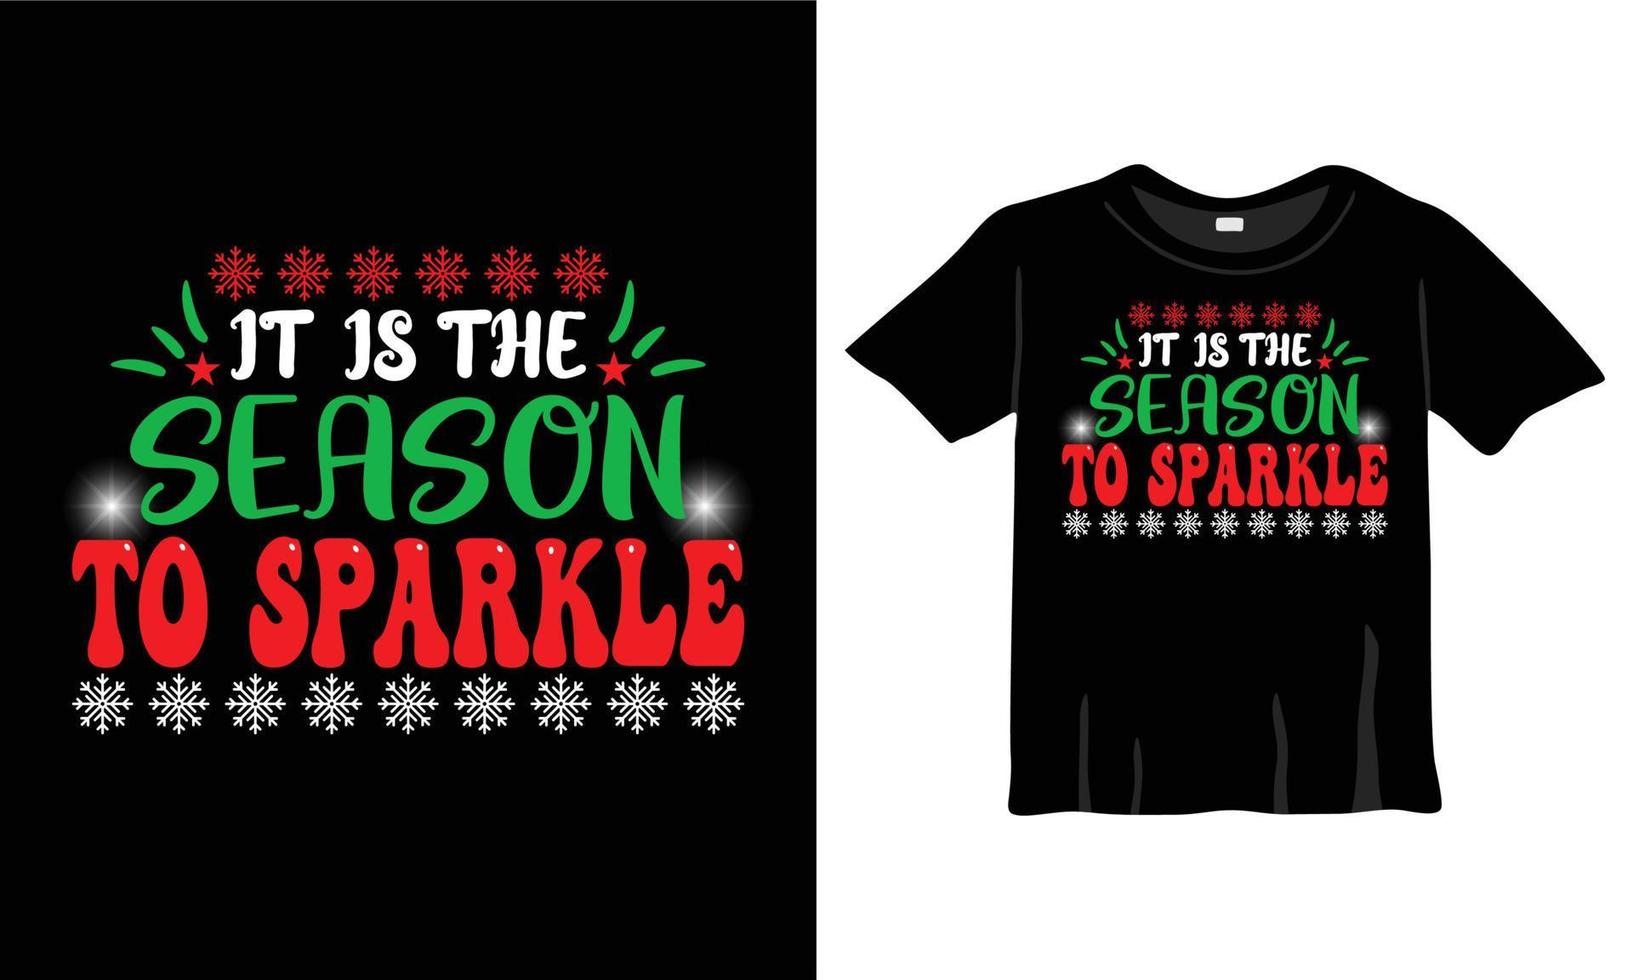 It is the Season to Sparkle Christmas T-Shirt Design Template for Christmas Celebration. Good for Greeting cards, t-shirts, mugs, and gifts. For Men, Women, and Baby clothing vector